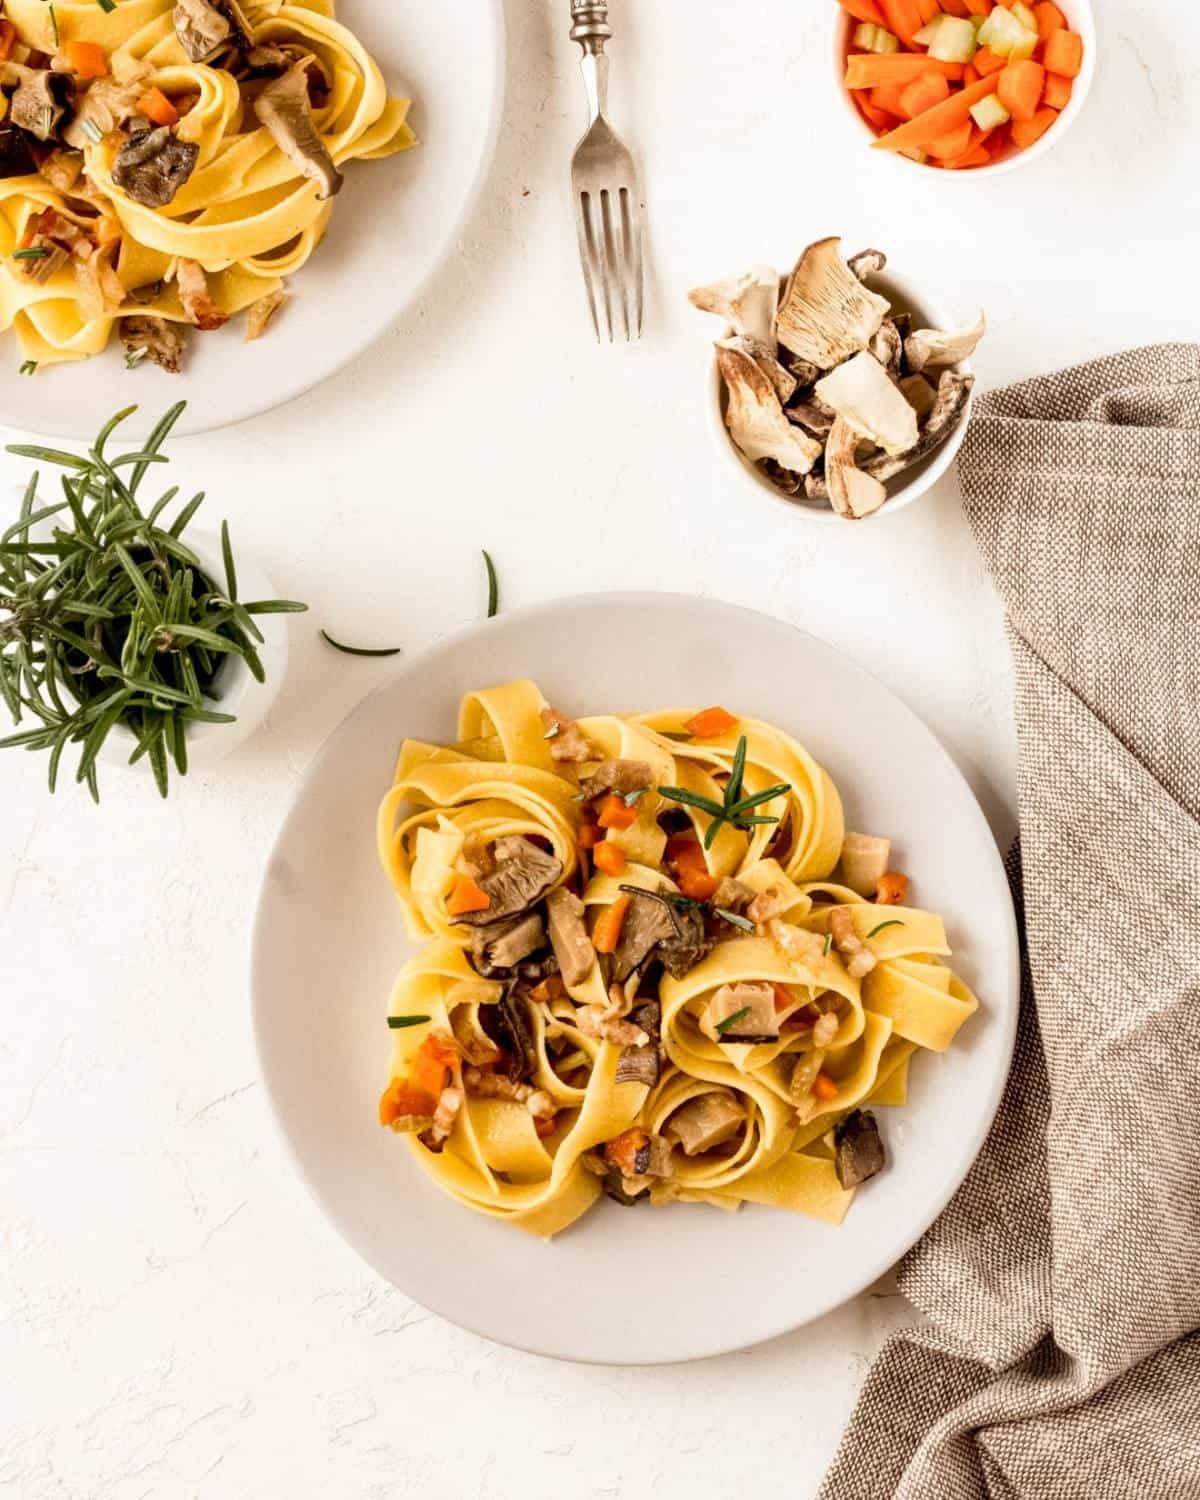 Two plates of Mushrooms and Bacon Tagliatelle on white plates. The pasta shown mushrooms and carrots on top. There are fresh rosemary in a glass and a bowl with mushrooms ns